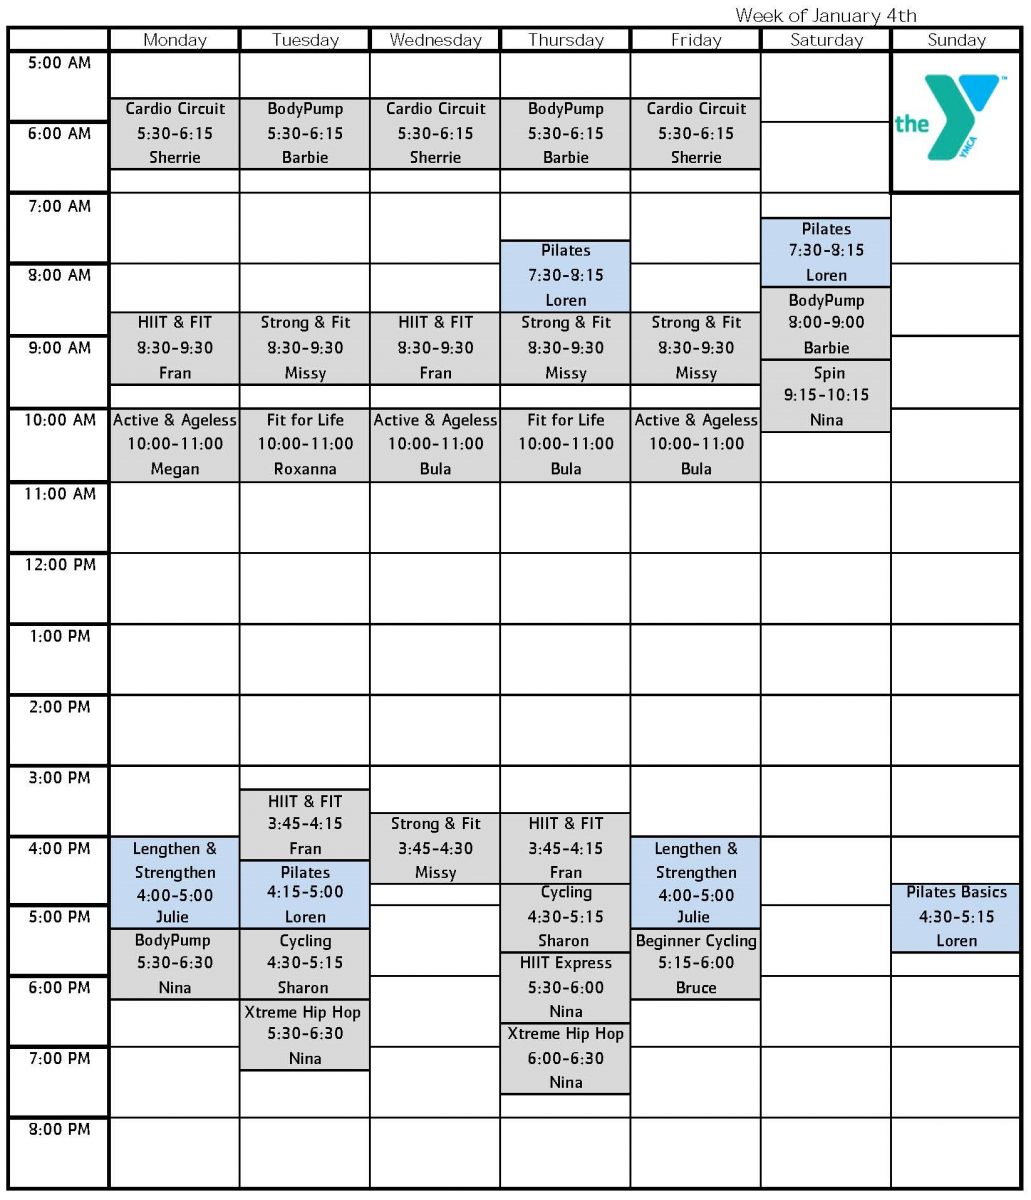 Group Fitness YMCA class schedule